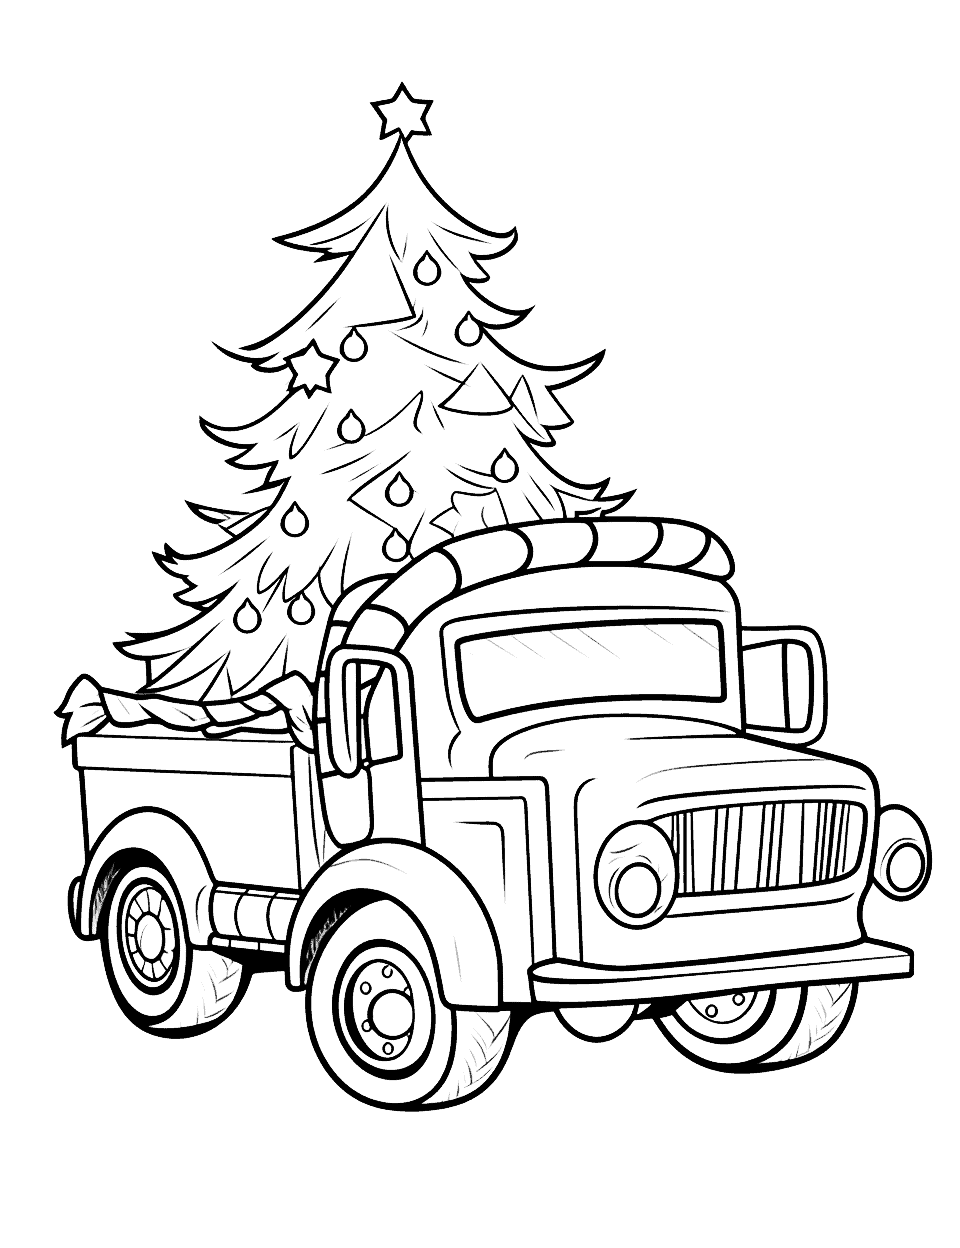 Festive Firetruck Christmas Coloring Page - A firetruck decorated with Christmas lights.